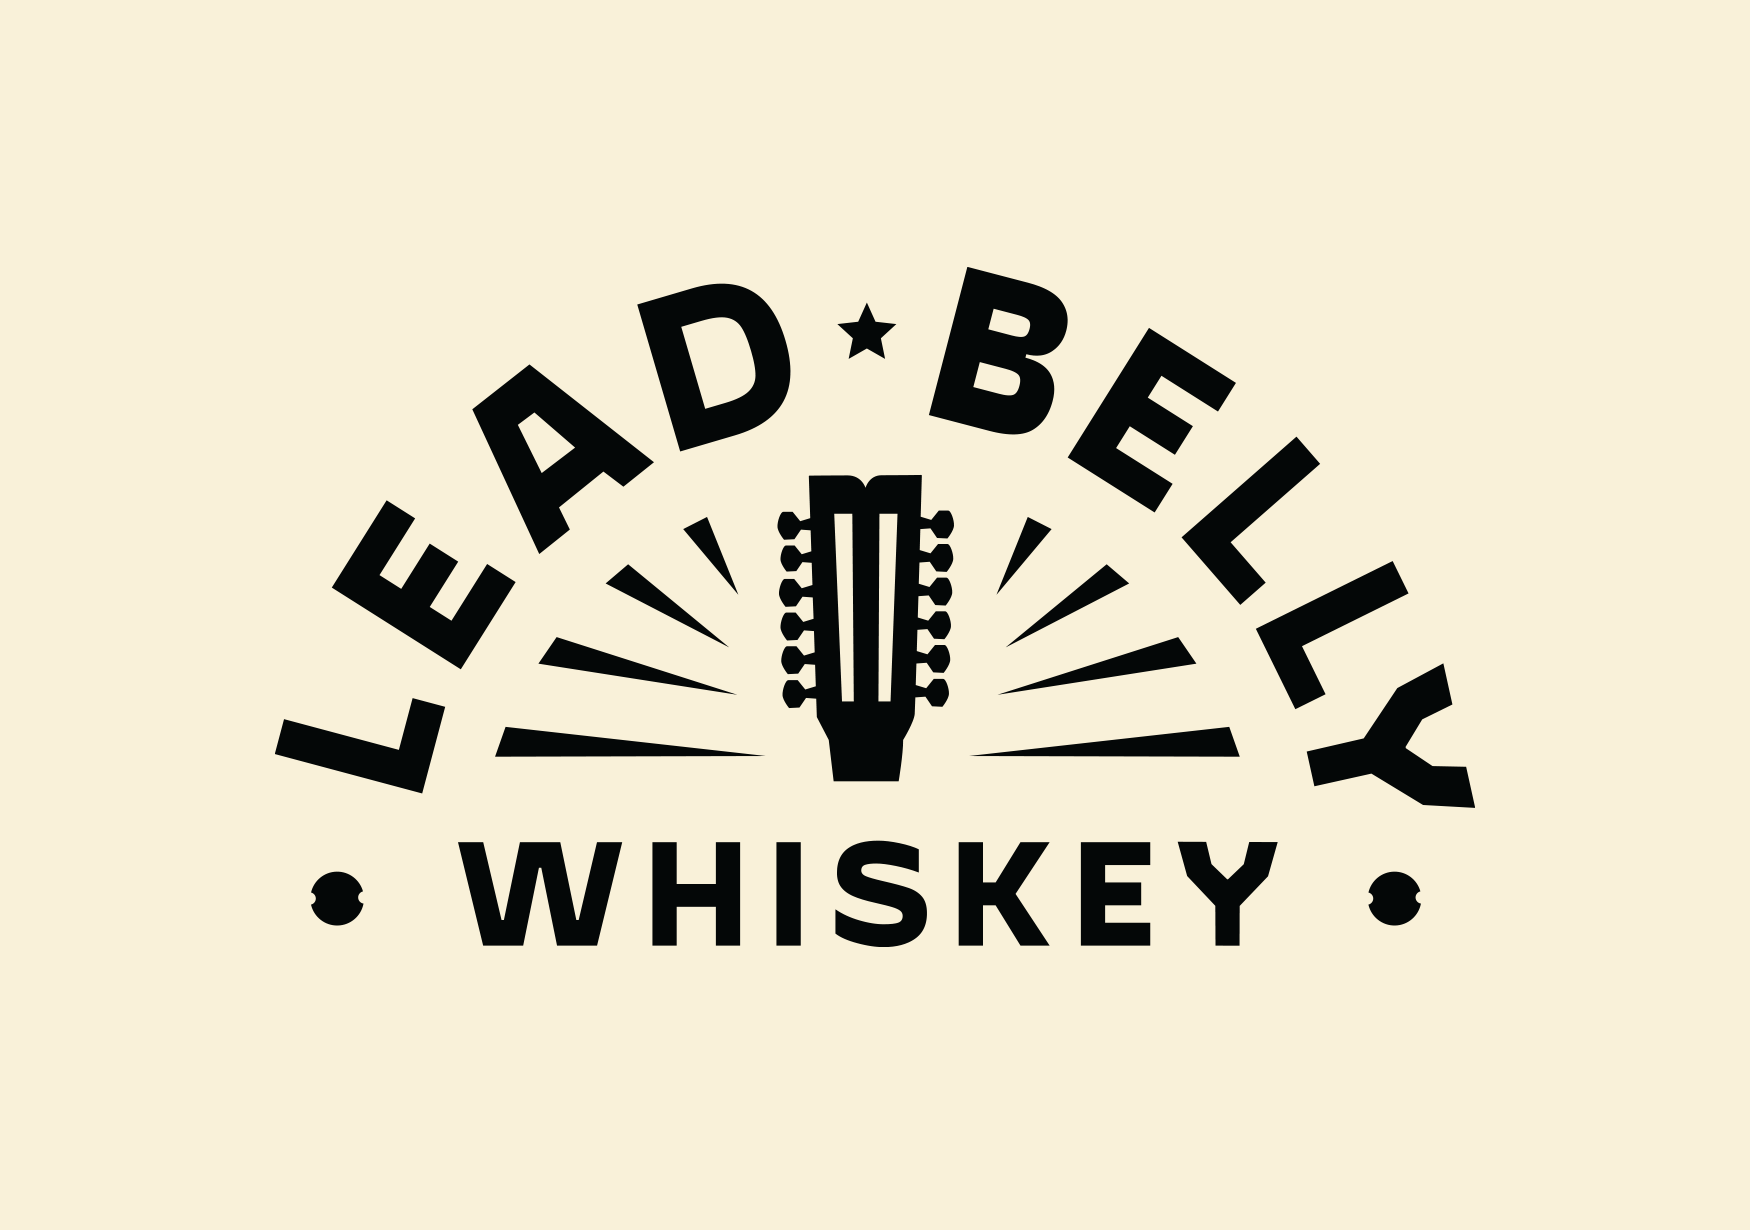 lead-belly-whiskey